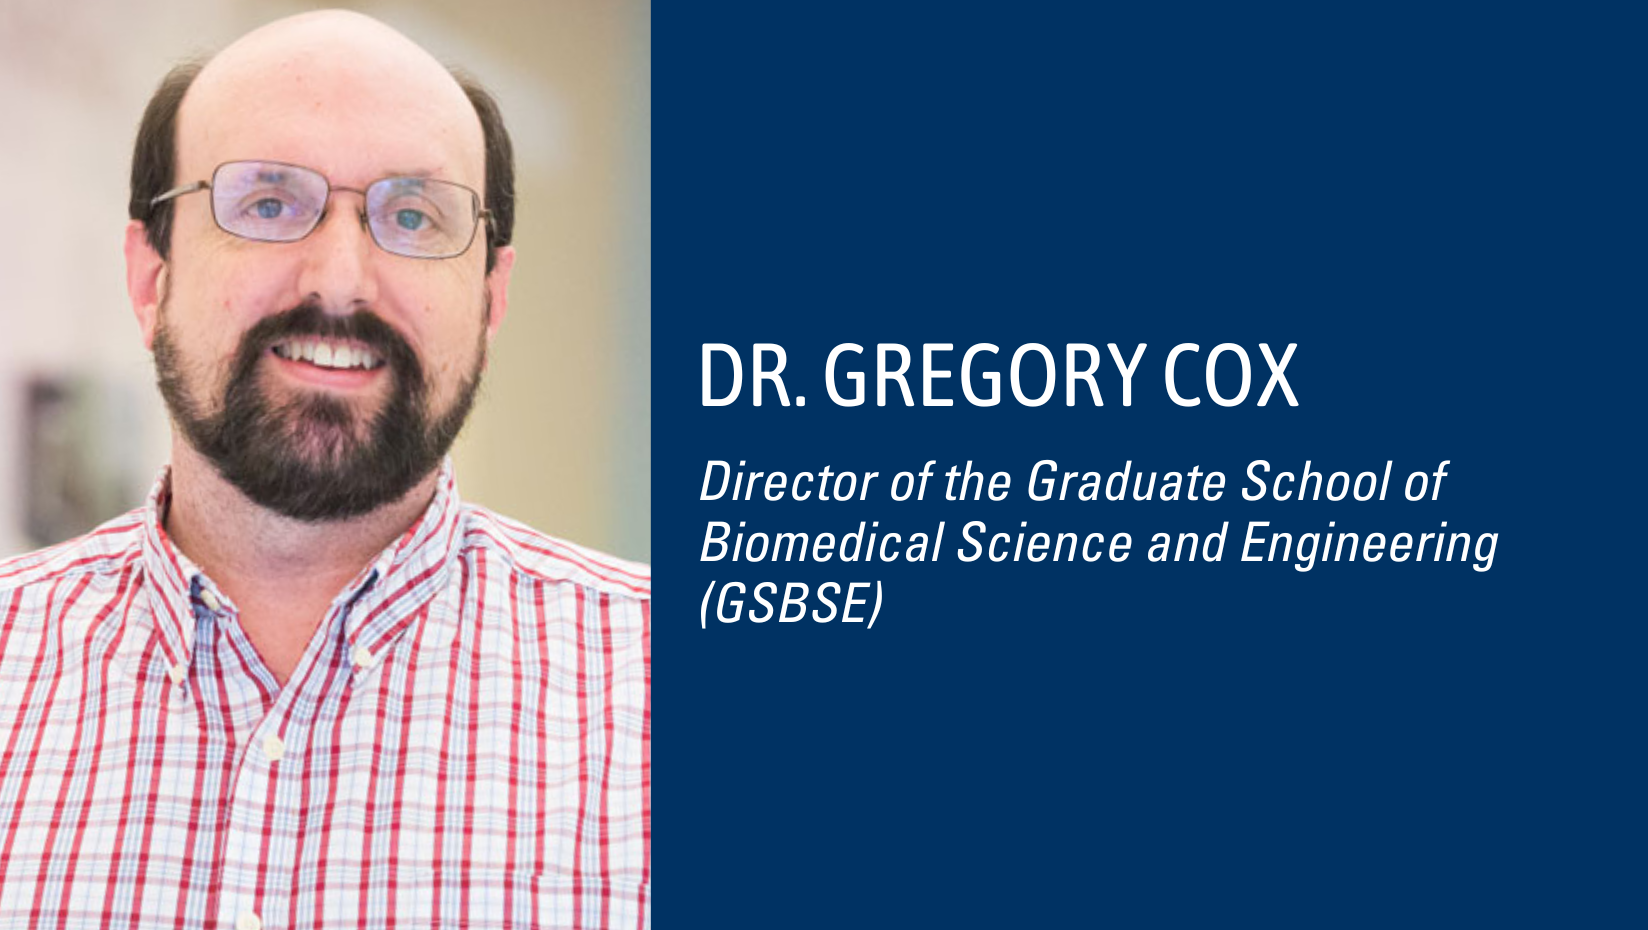 Dr. Gregory Cox Director of the Graduate School of Biomedical Science and Engineering (GSBSE)